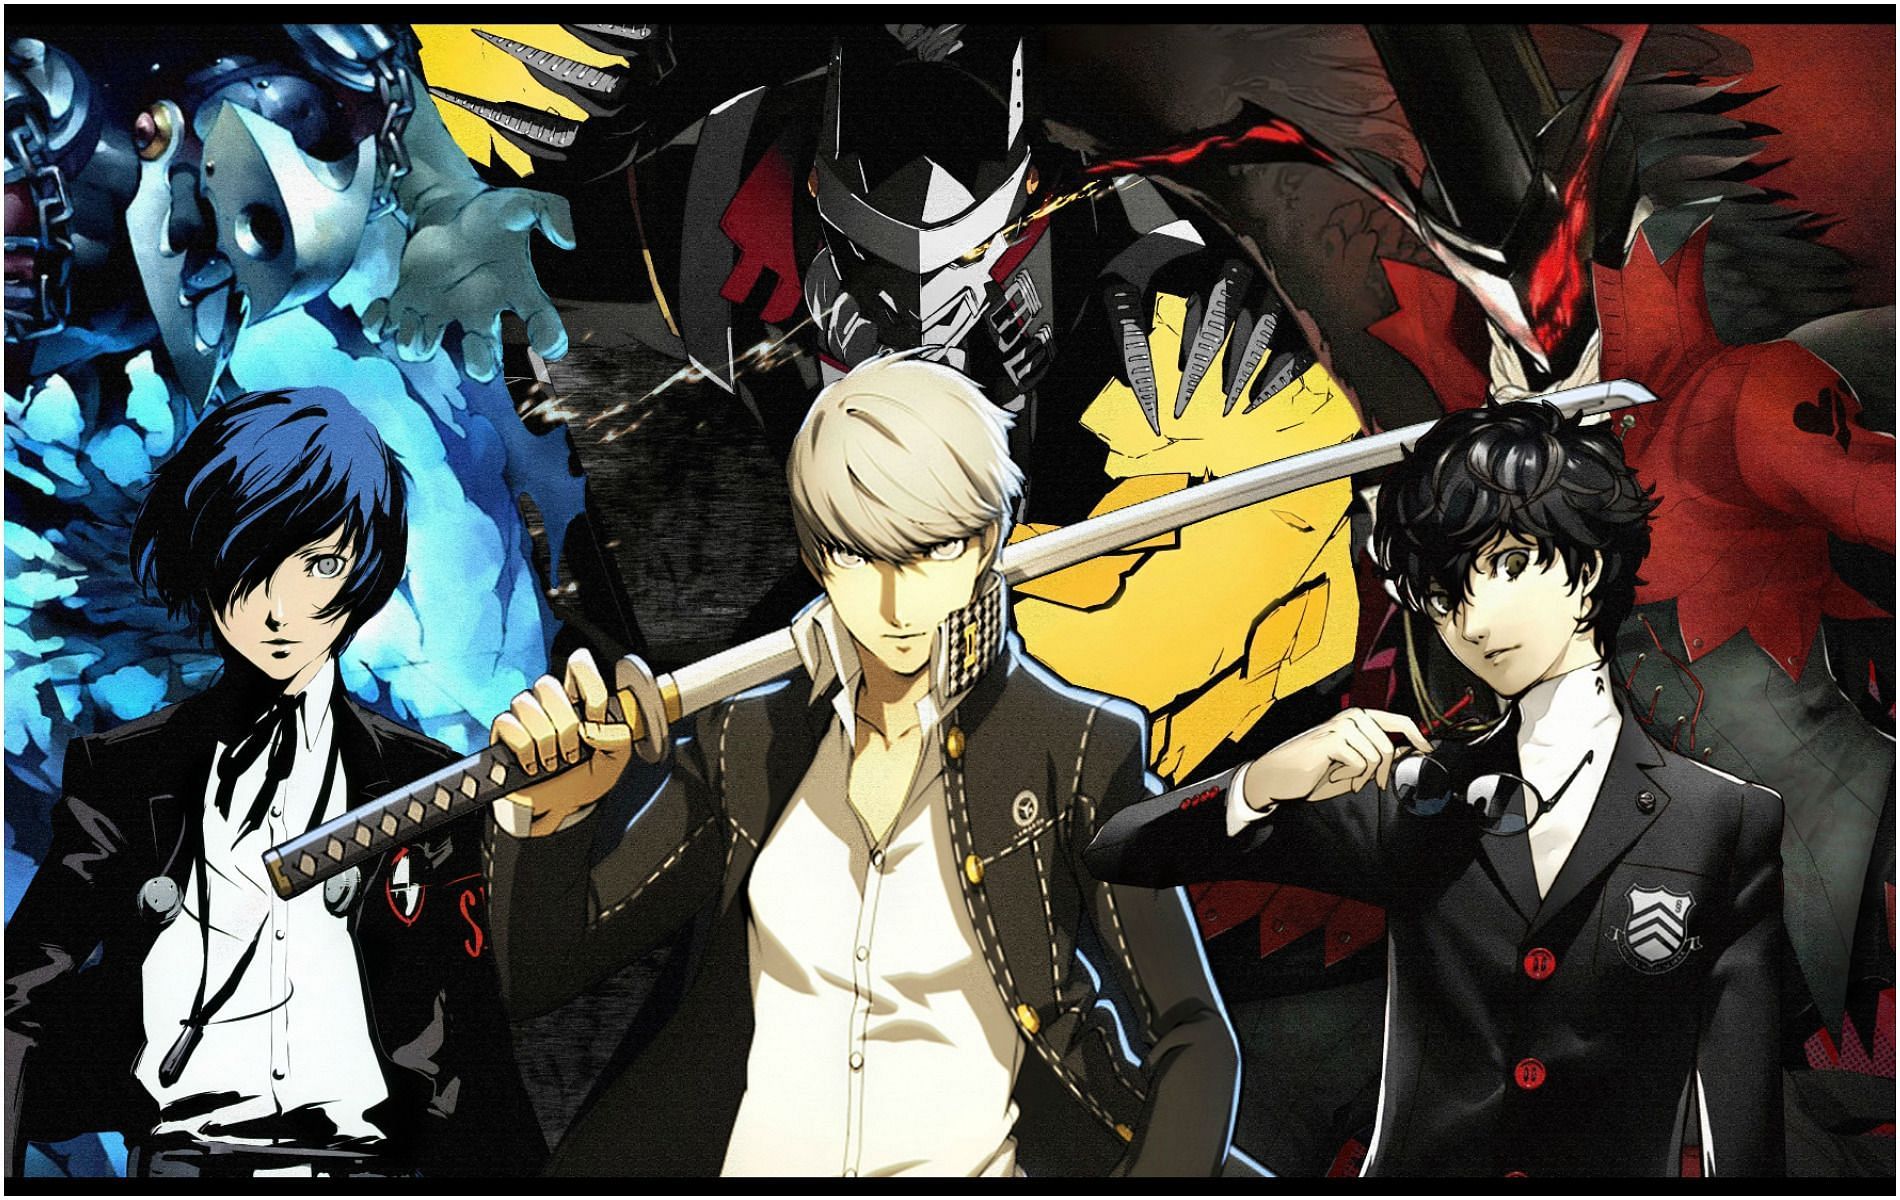 Persona 3 Portable, Persona 4 Golden, And Persona 5 Royal Announced For  Xbox Game Pass